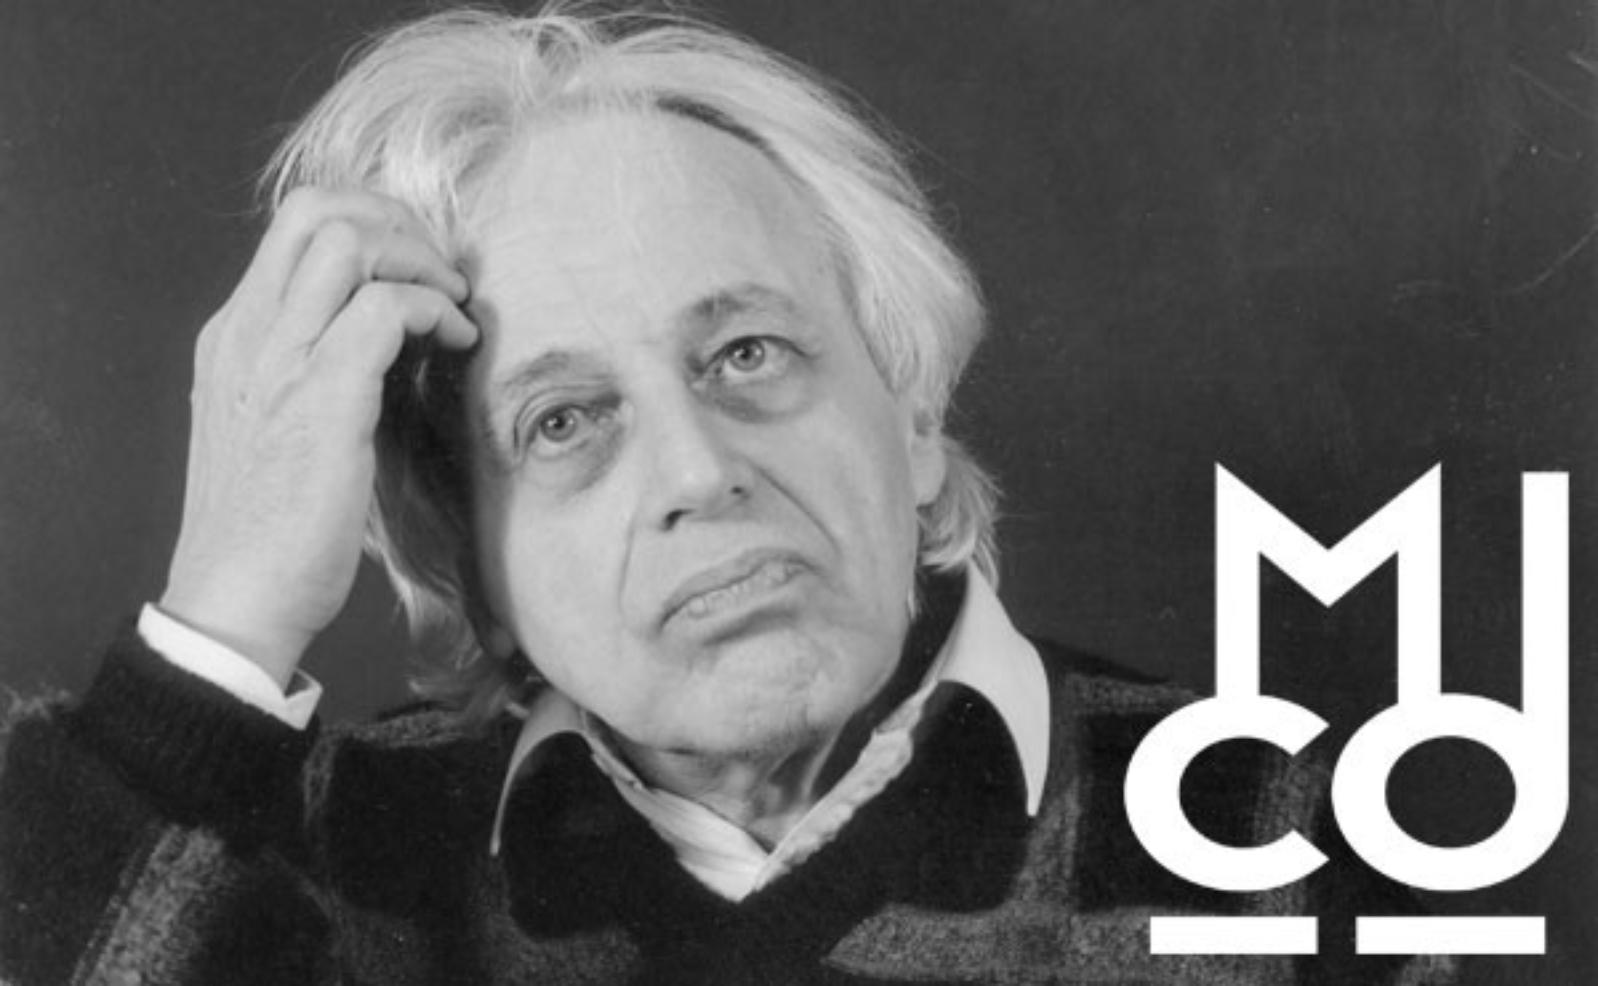 The fabulous pianist: the complete piano works by György Ligeti